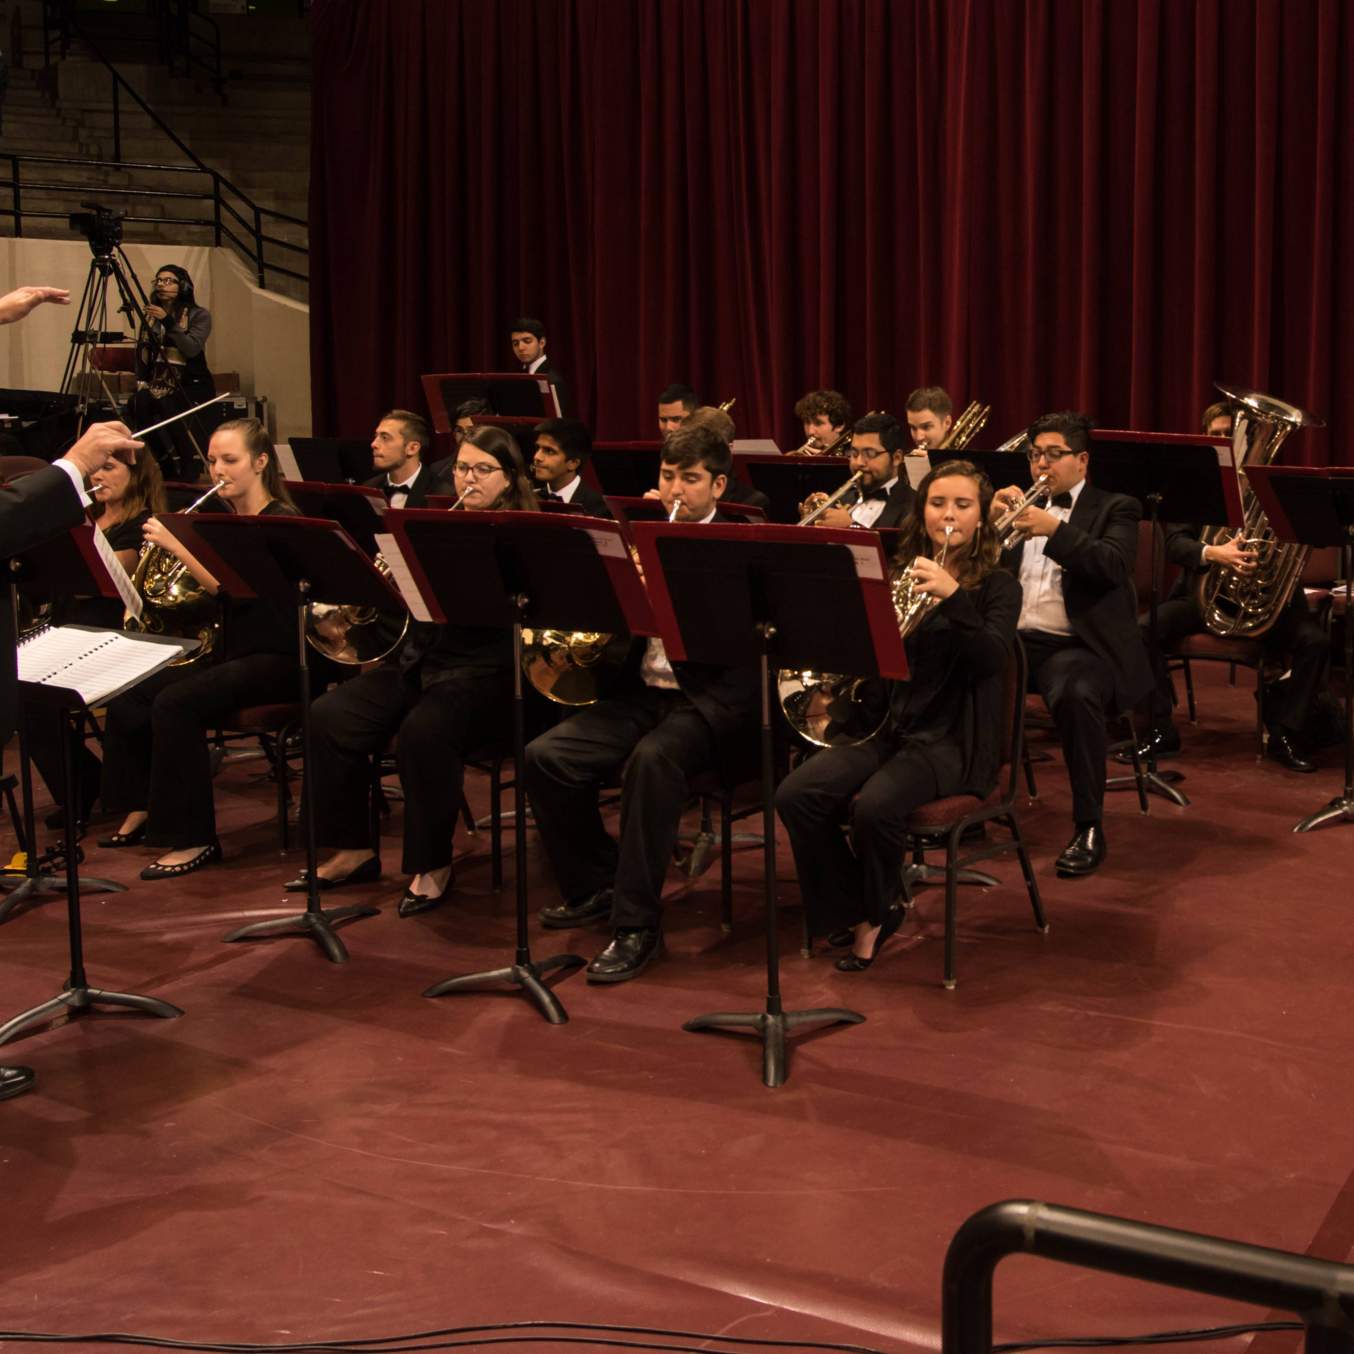 Ceremonial Brass Musicians performs "Big and Bright,"  conducted by Dr. Thomas S. Clark.